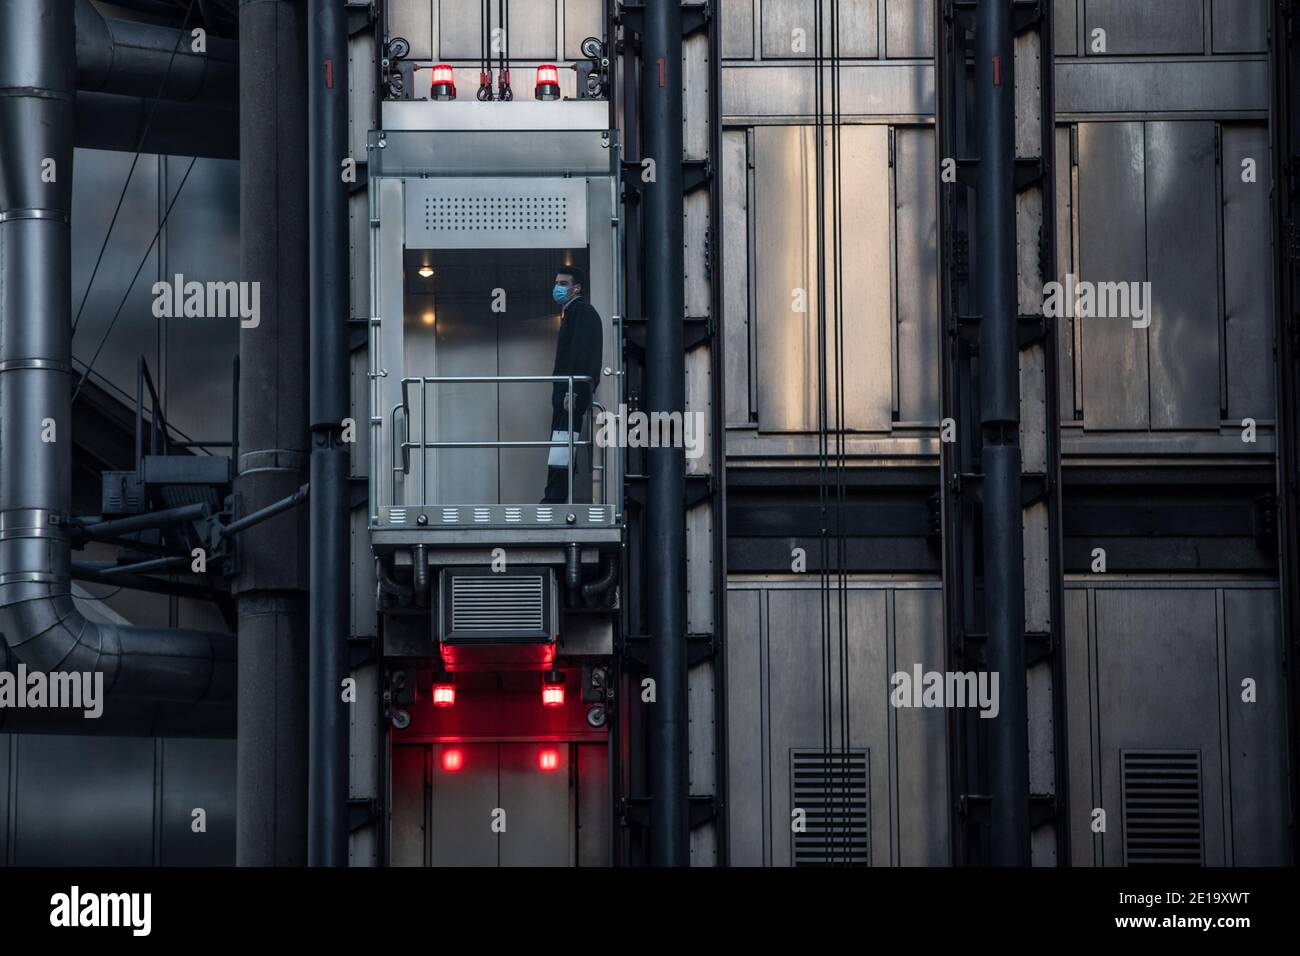 A worker takes the lift at Lloyds of London, in City of London during the Coronavirus Tier2 Lockdown, Financial district, London, England, UK Stock Photo